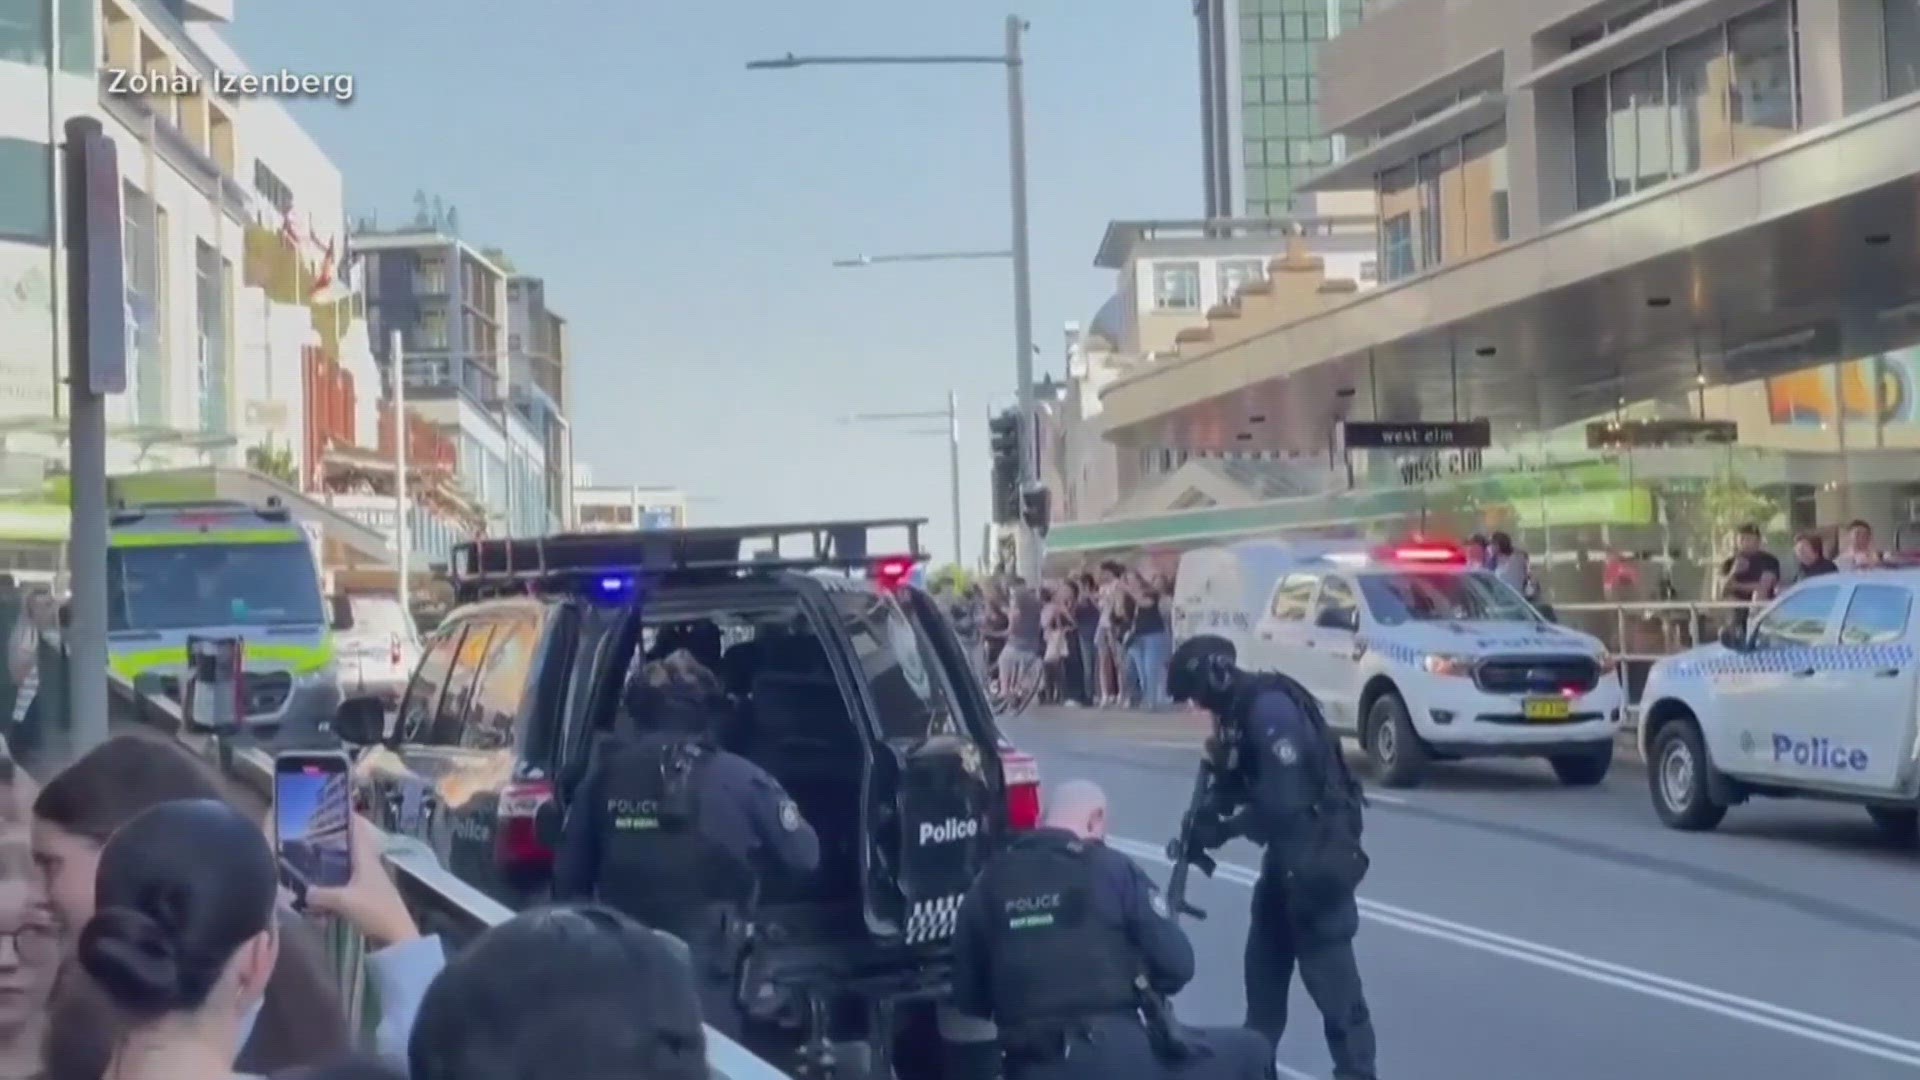 A man stabbed six people to death at a busy Sydney shopping center Saturday before he was fatally shot, police said.